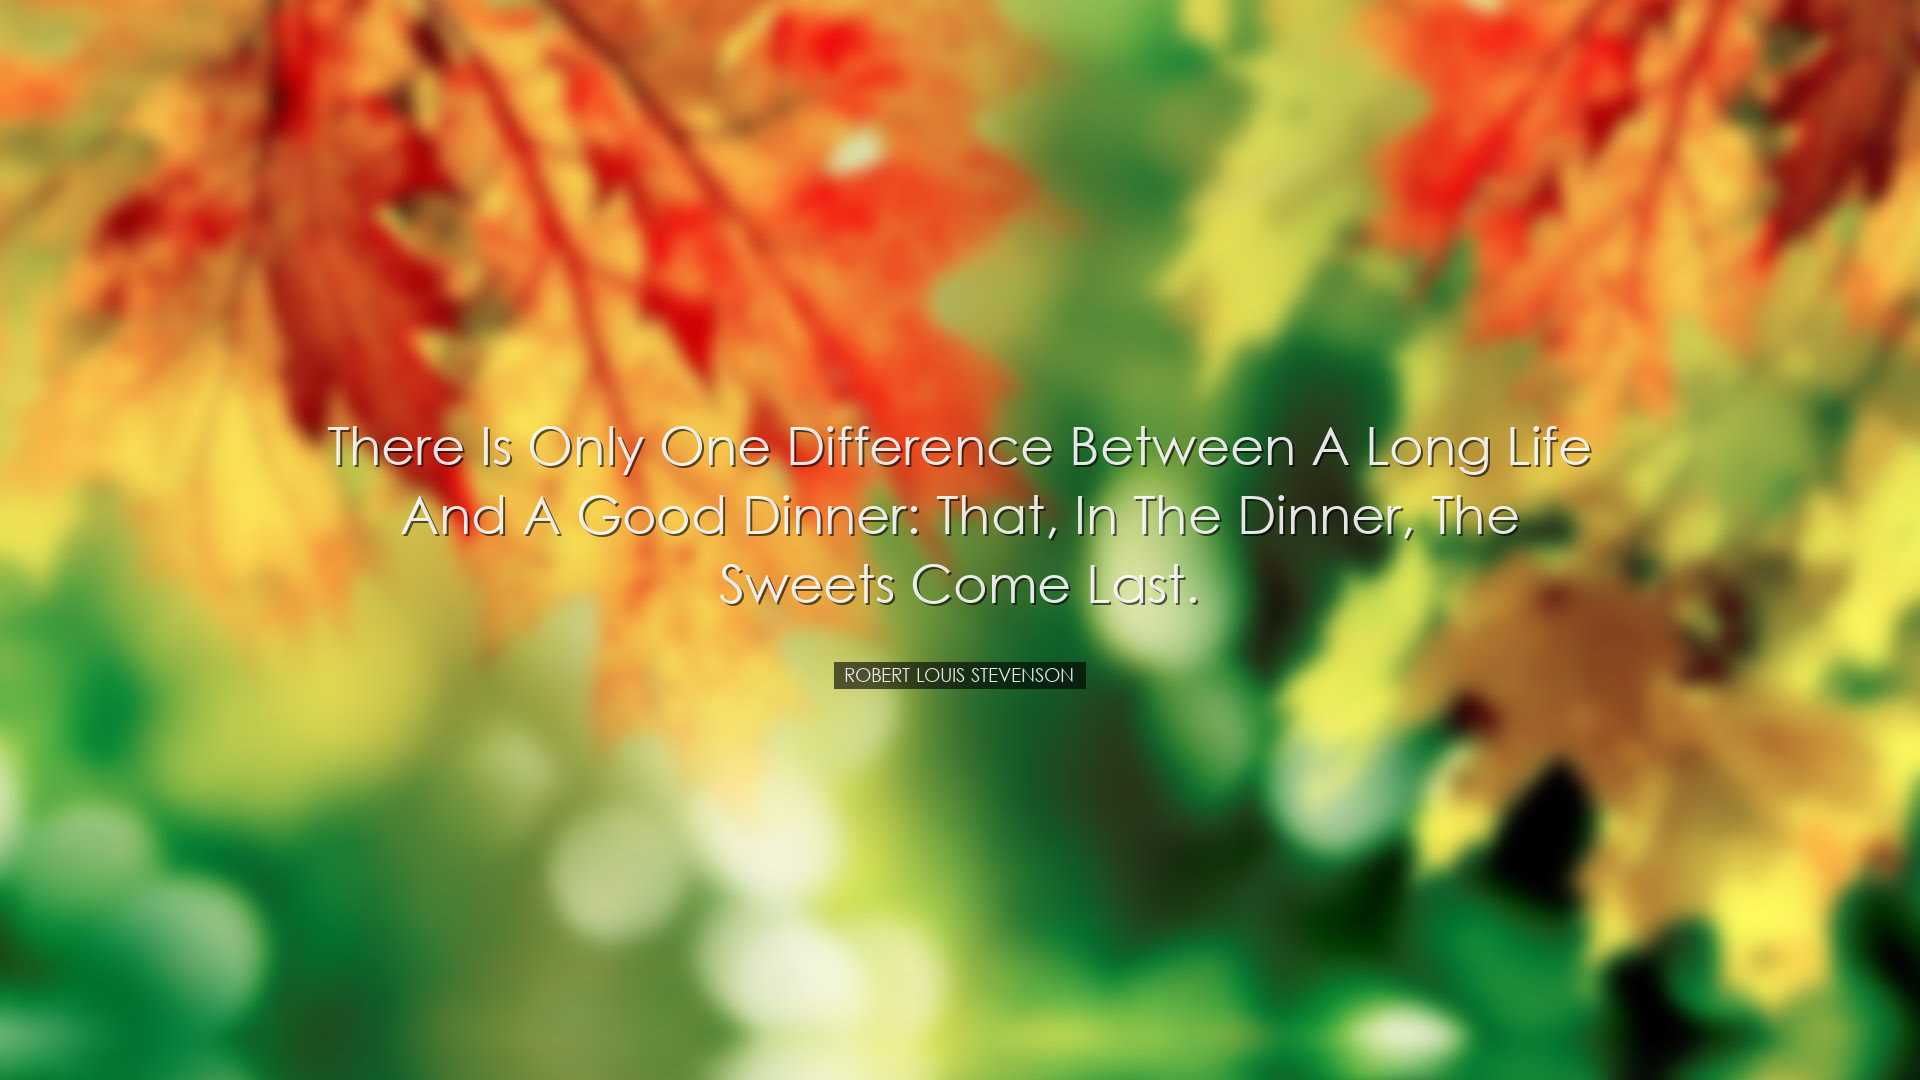 There is only one difference between a long life and a good dinner